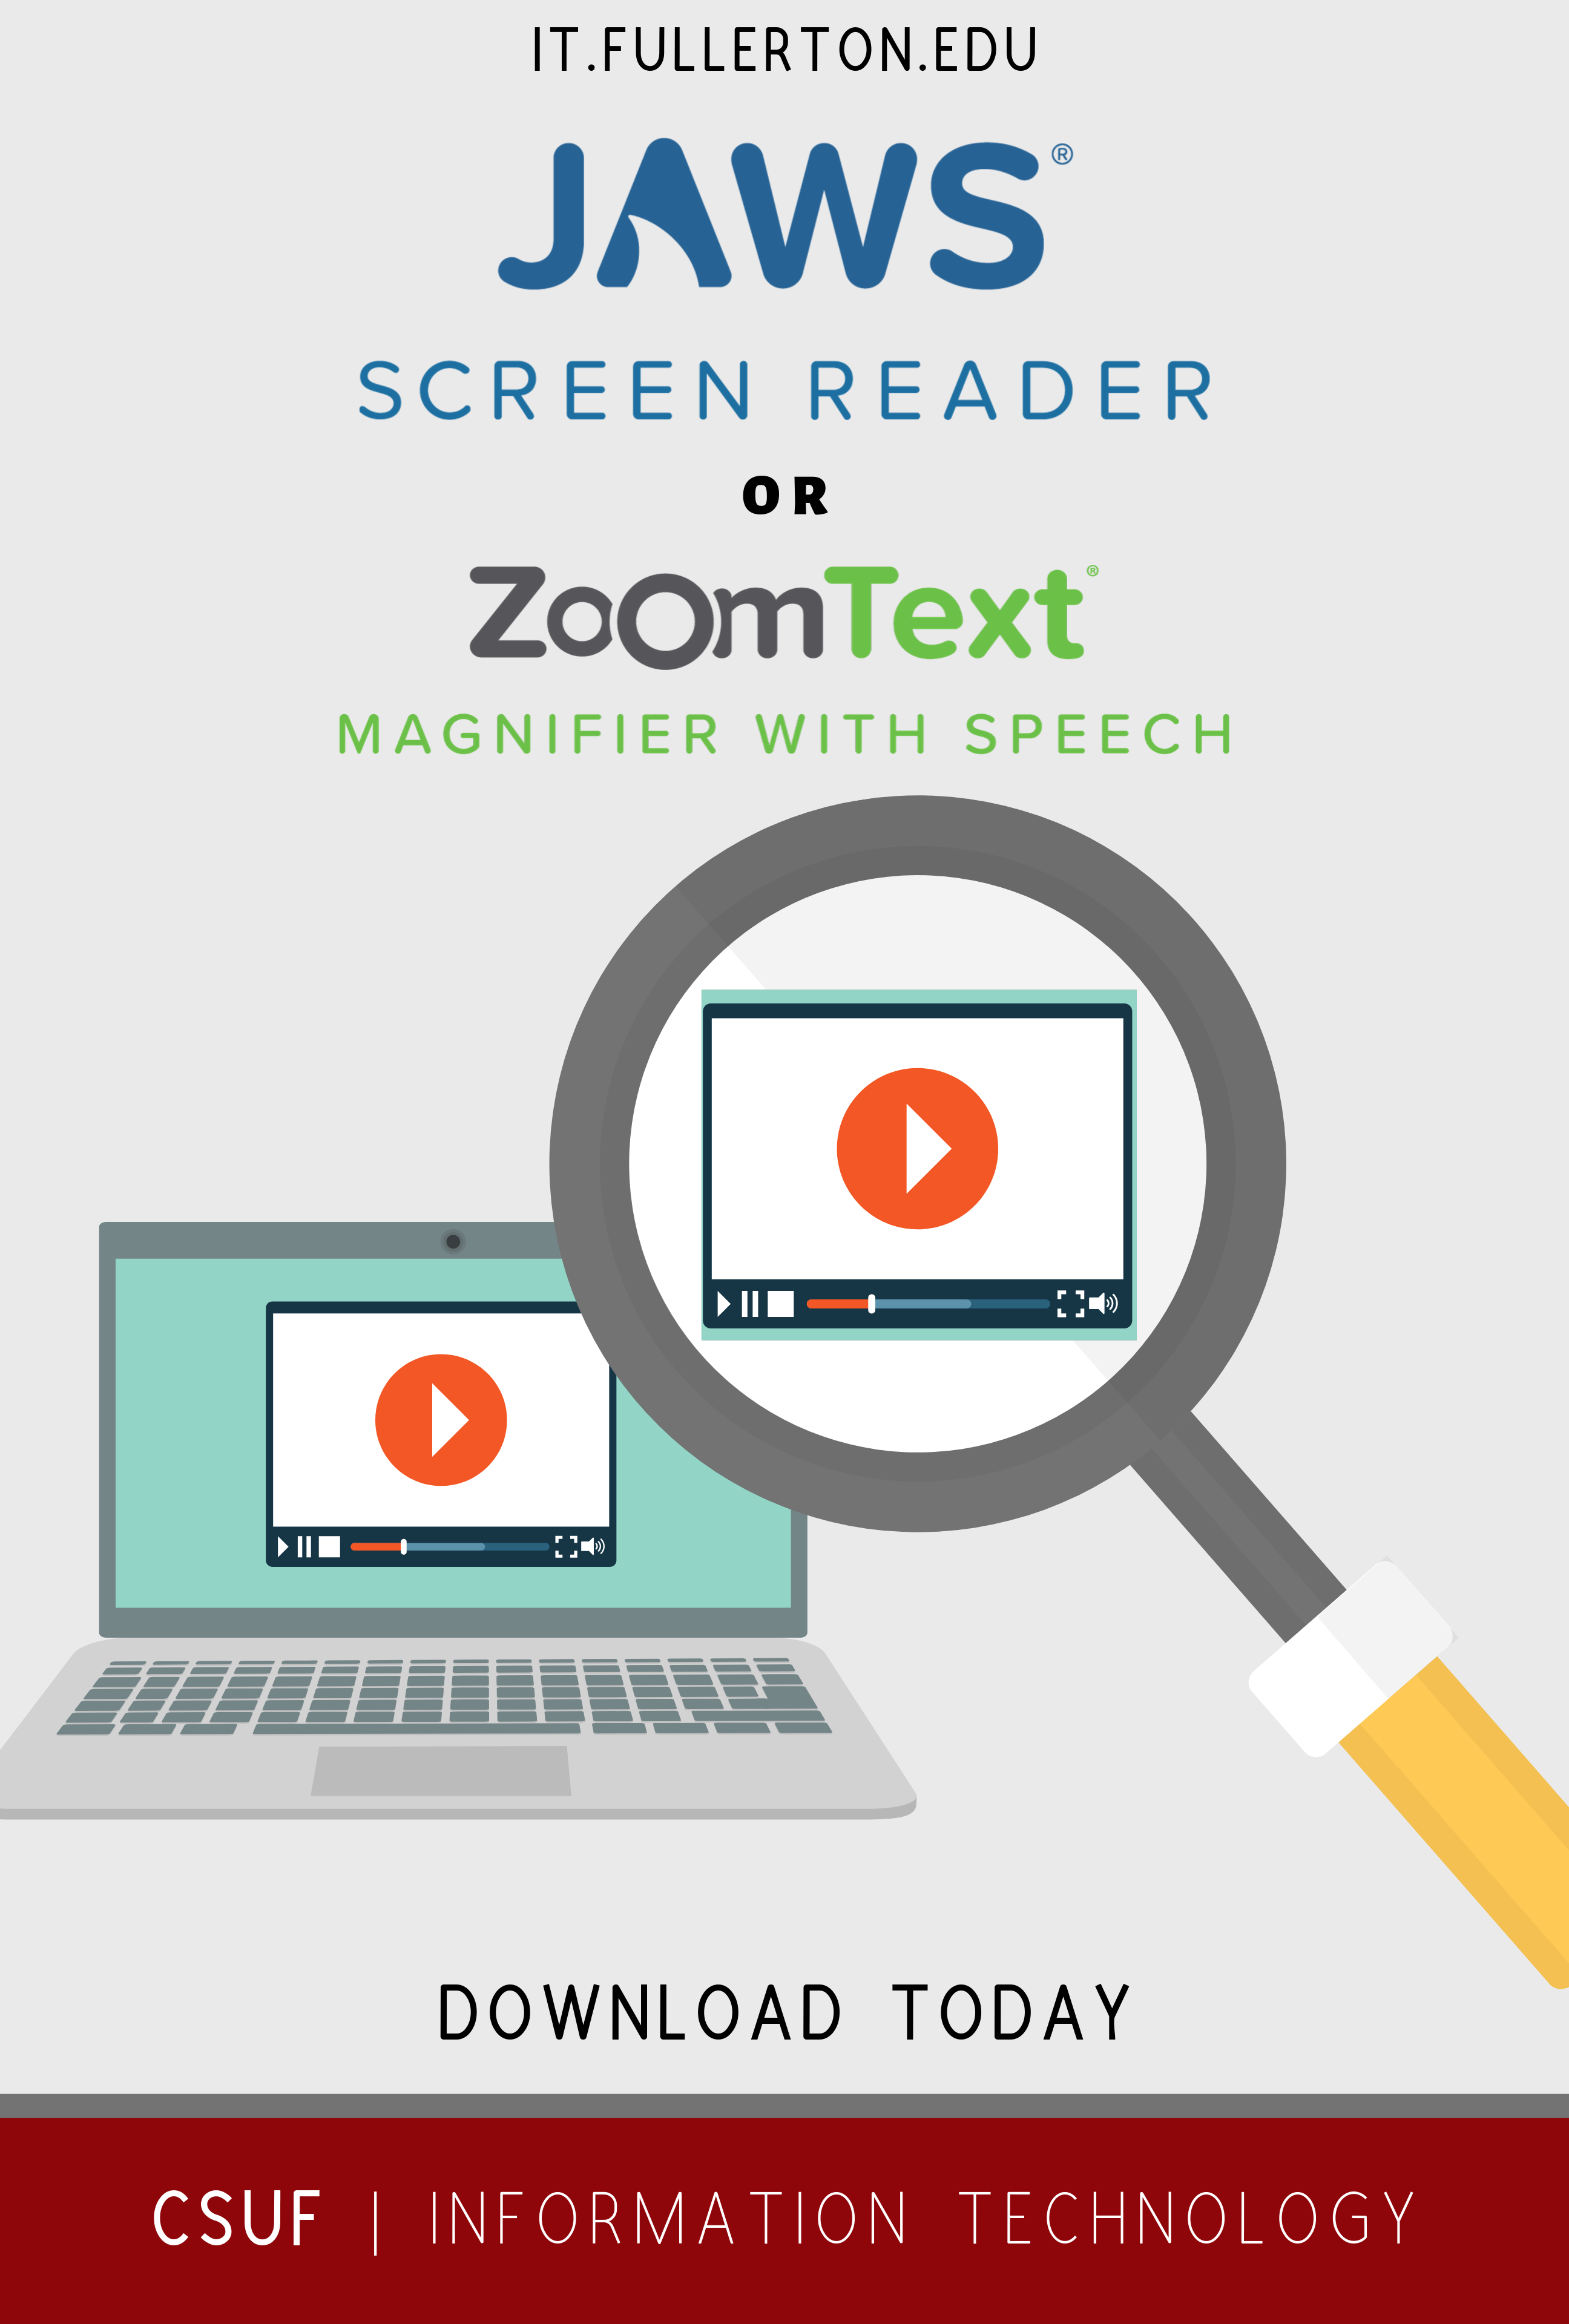 Student Services: ZoomText & JAWS